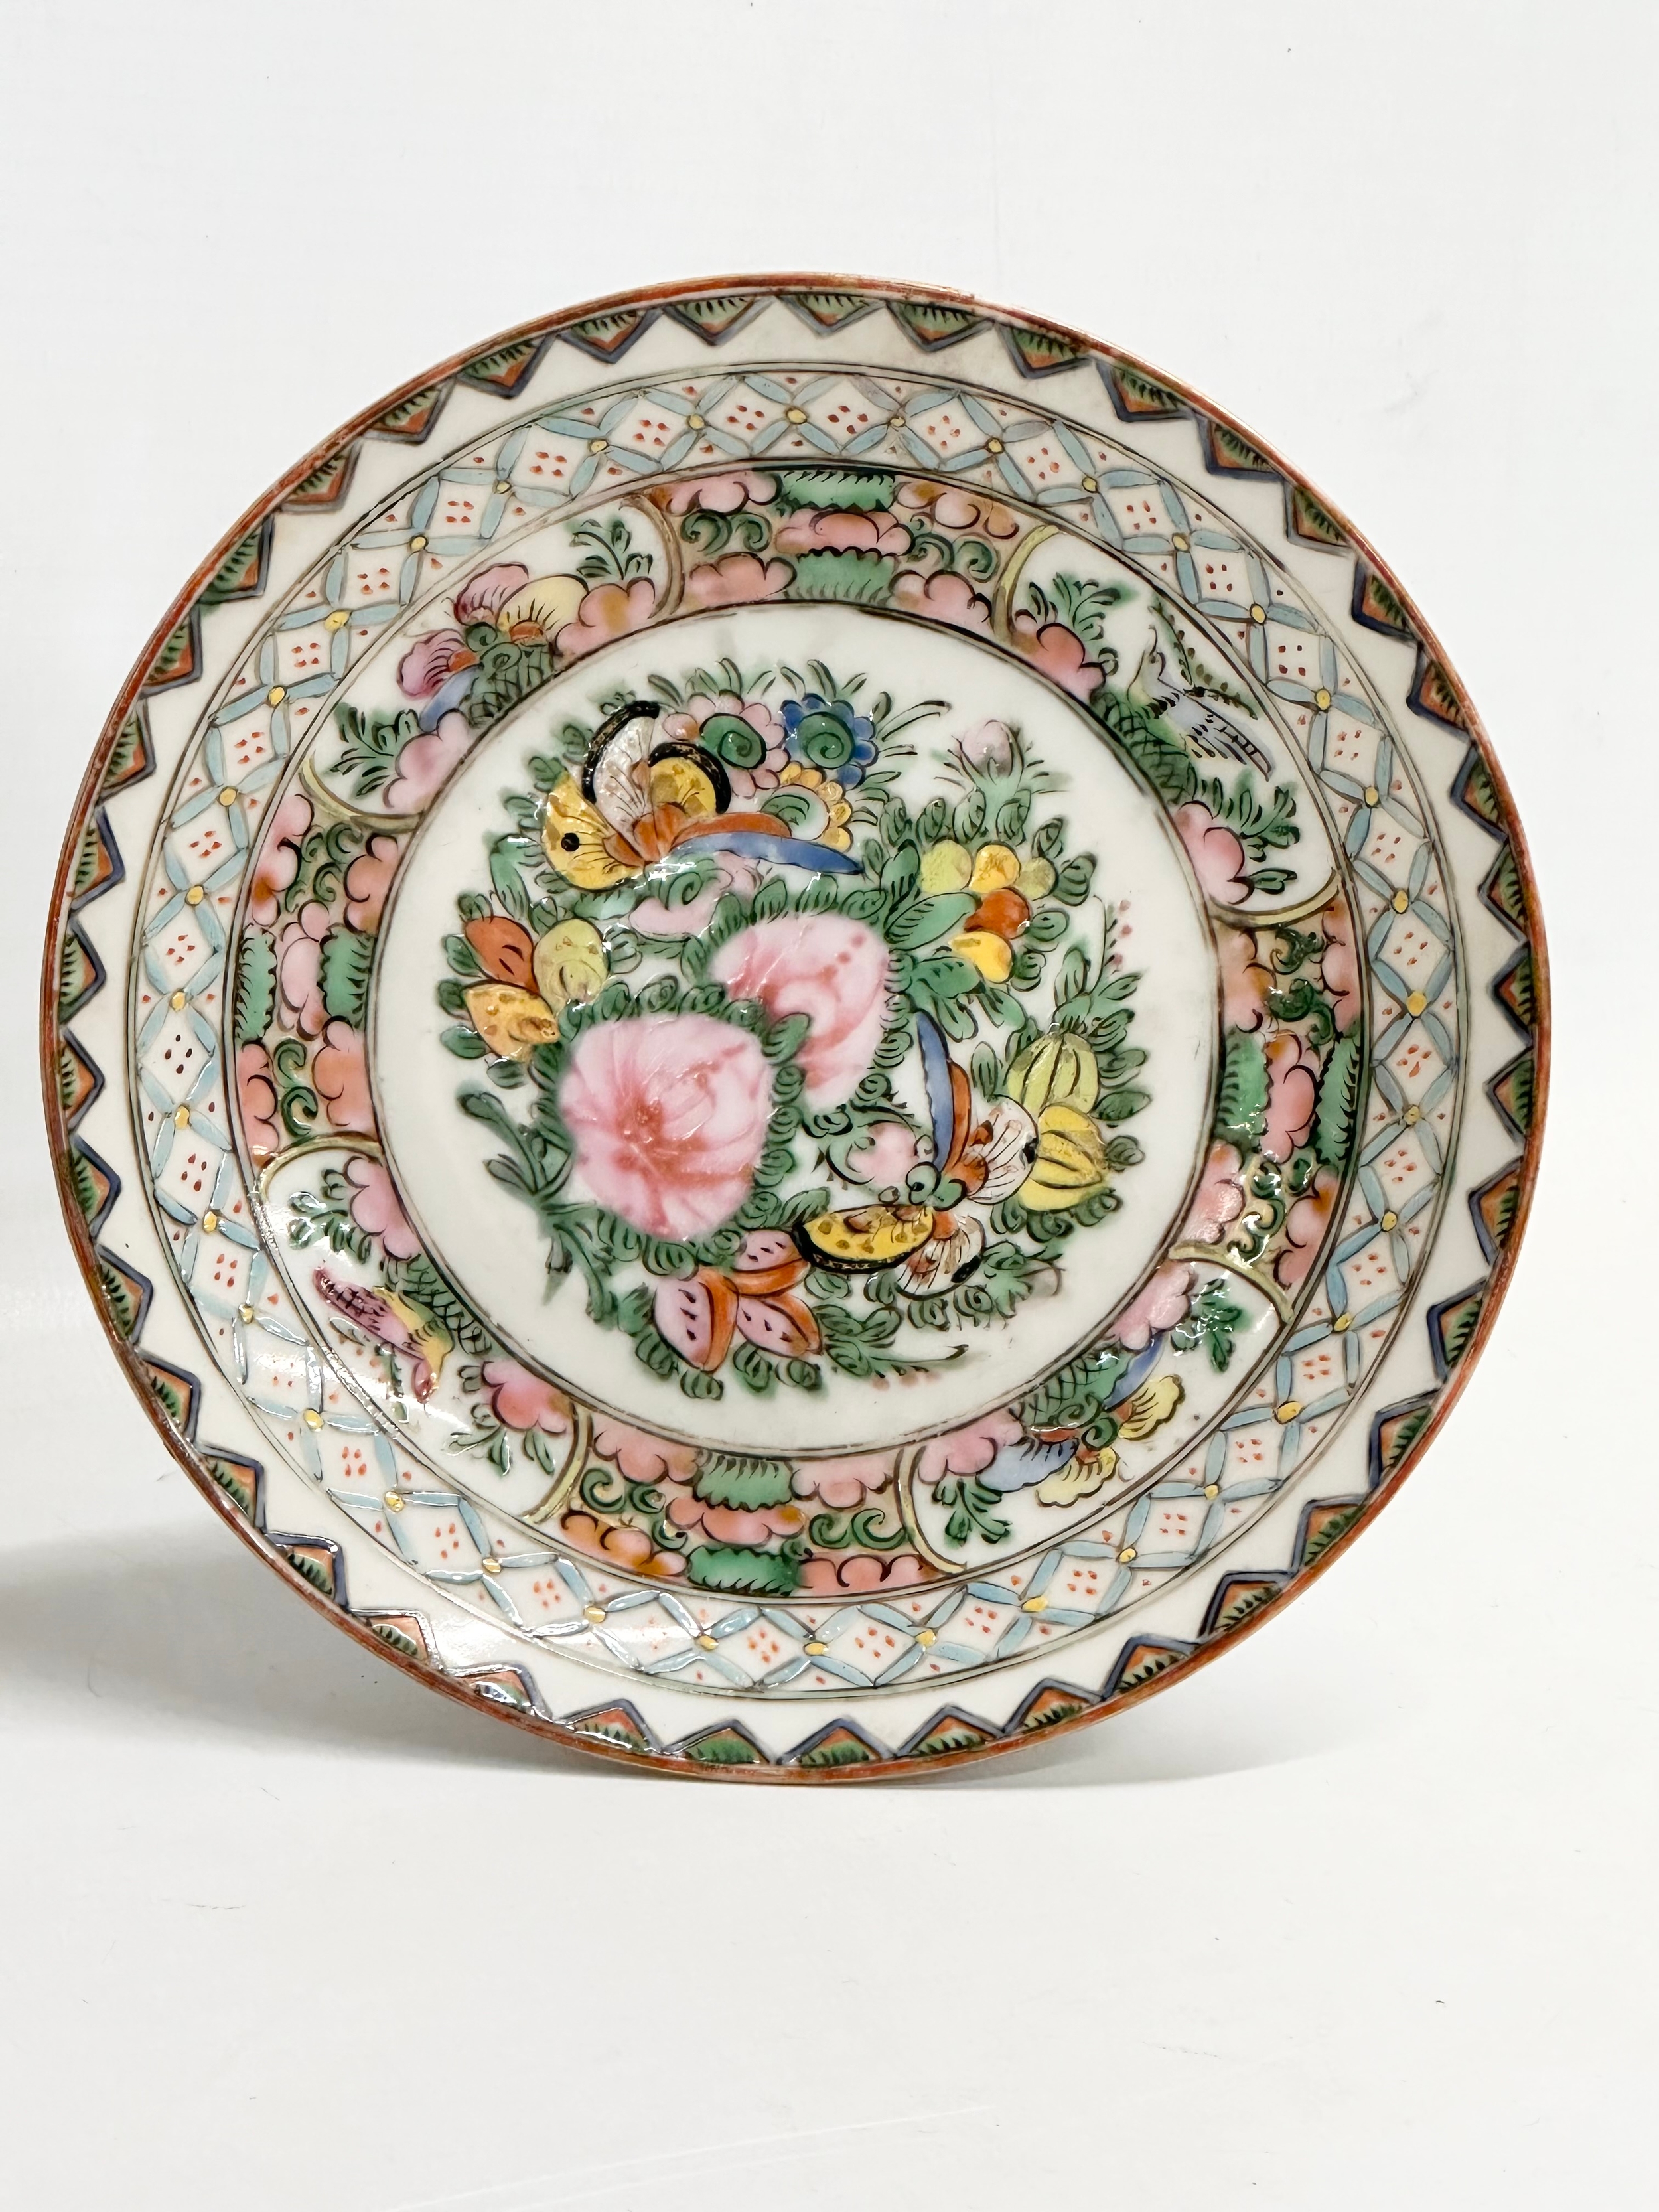 2 mid 19th century Chinese Emperor Xianfeng Rose Medallion saucer plates. 15.5cm. - Image 3 of 5